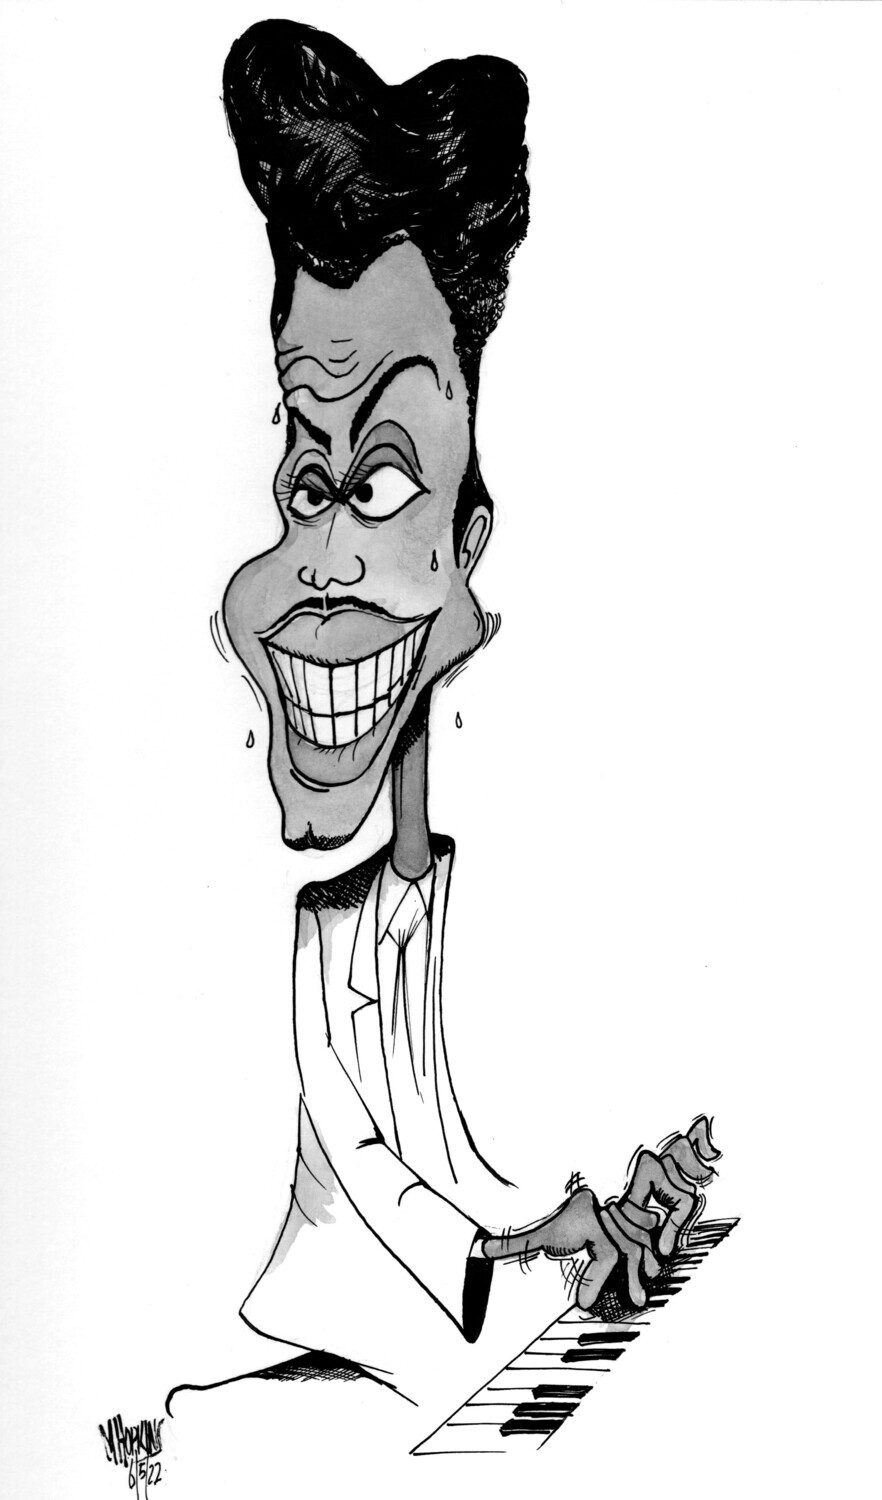 Little Richard - Caricature Limited Edition SignedGiclée Prints from $75 to $100